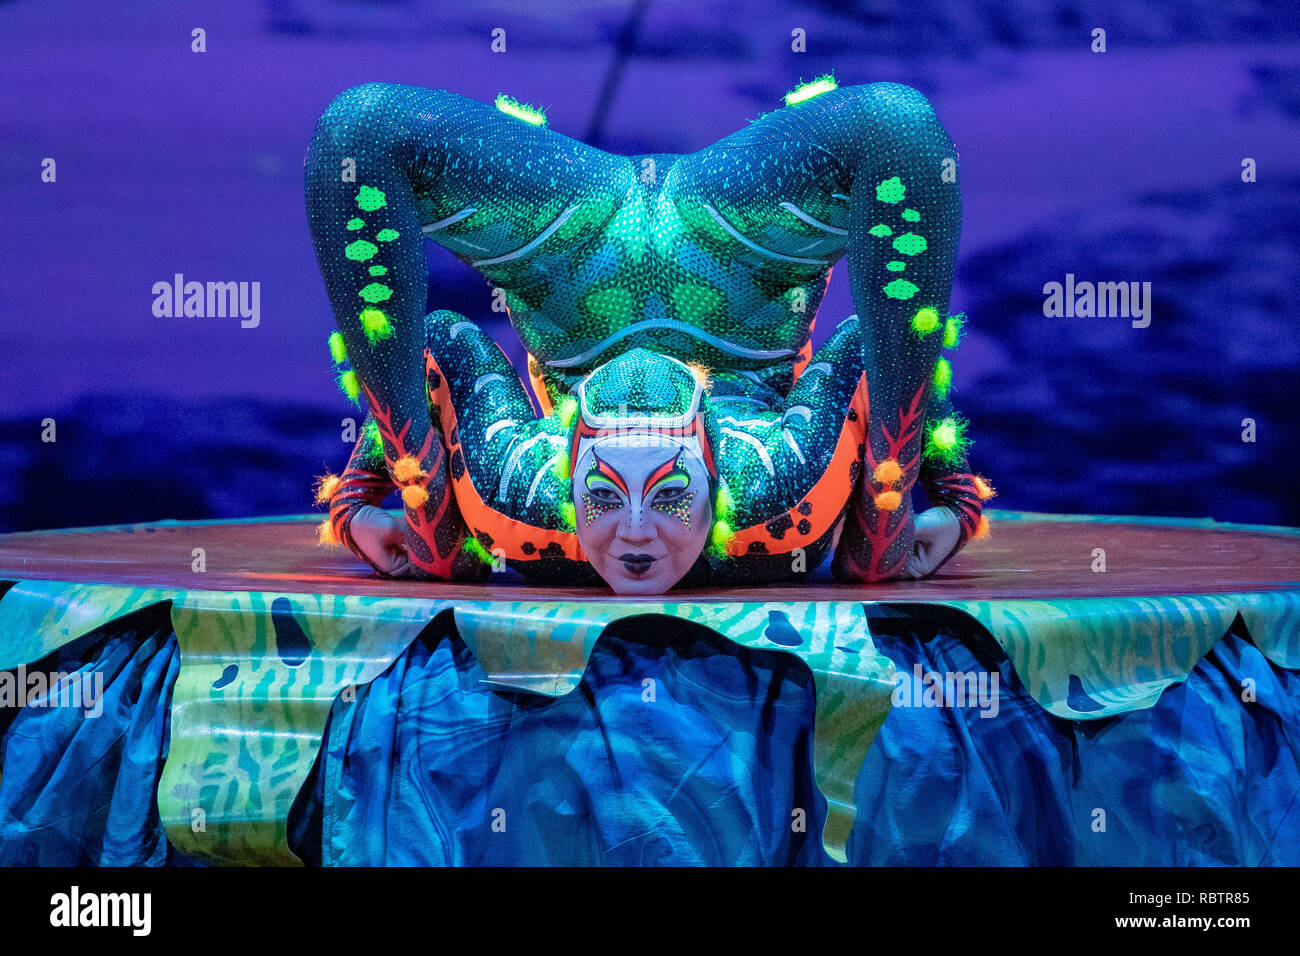 London, England. 11th January 201, Cast members of Cirque Du Soleil perform in 'Cirque Du Soleil's Totem' dress rehearsal at The Royal Albert Hall ,England, © Jason Richardson / Alamy Live News Stock Photo